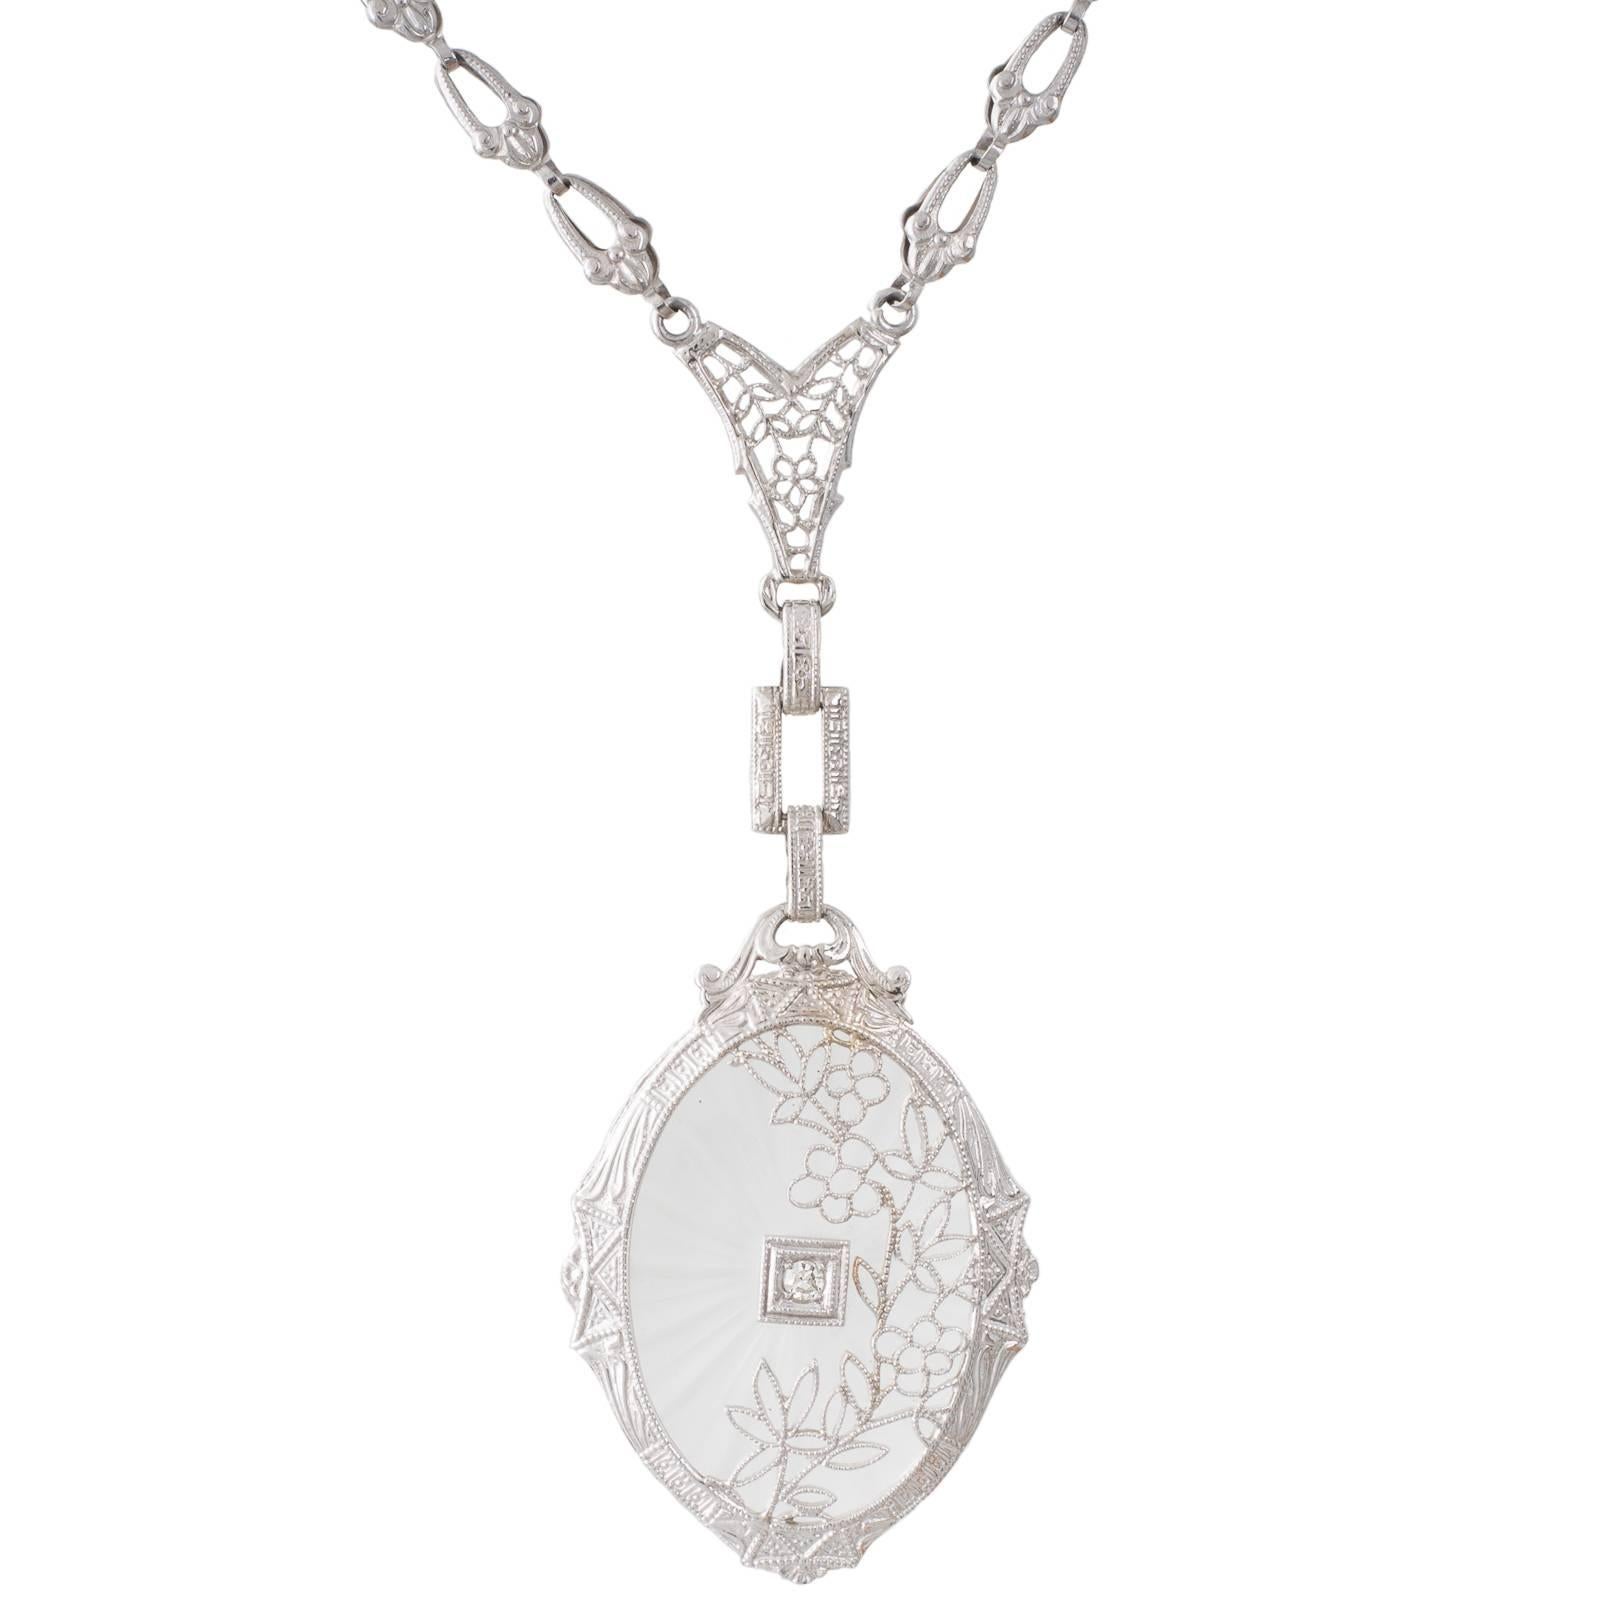 Art Deco Rock Crystal and Diamond Necklace